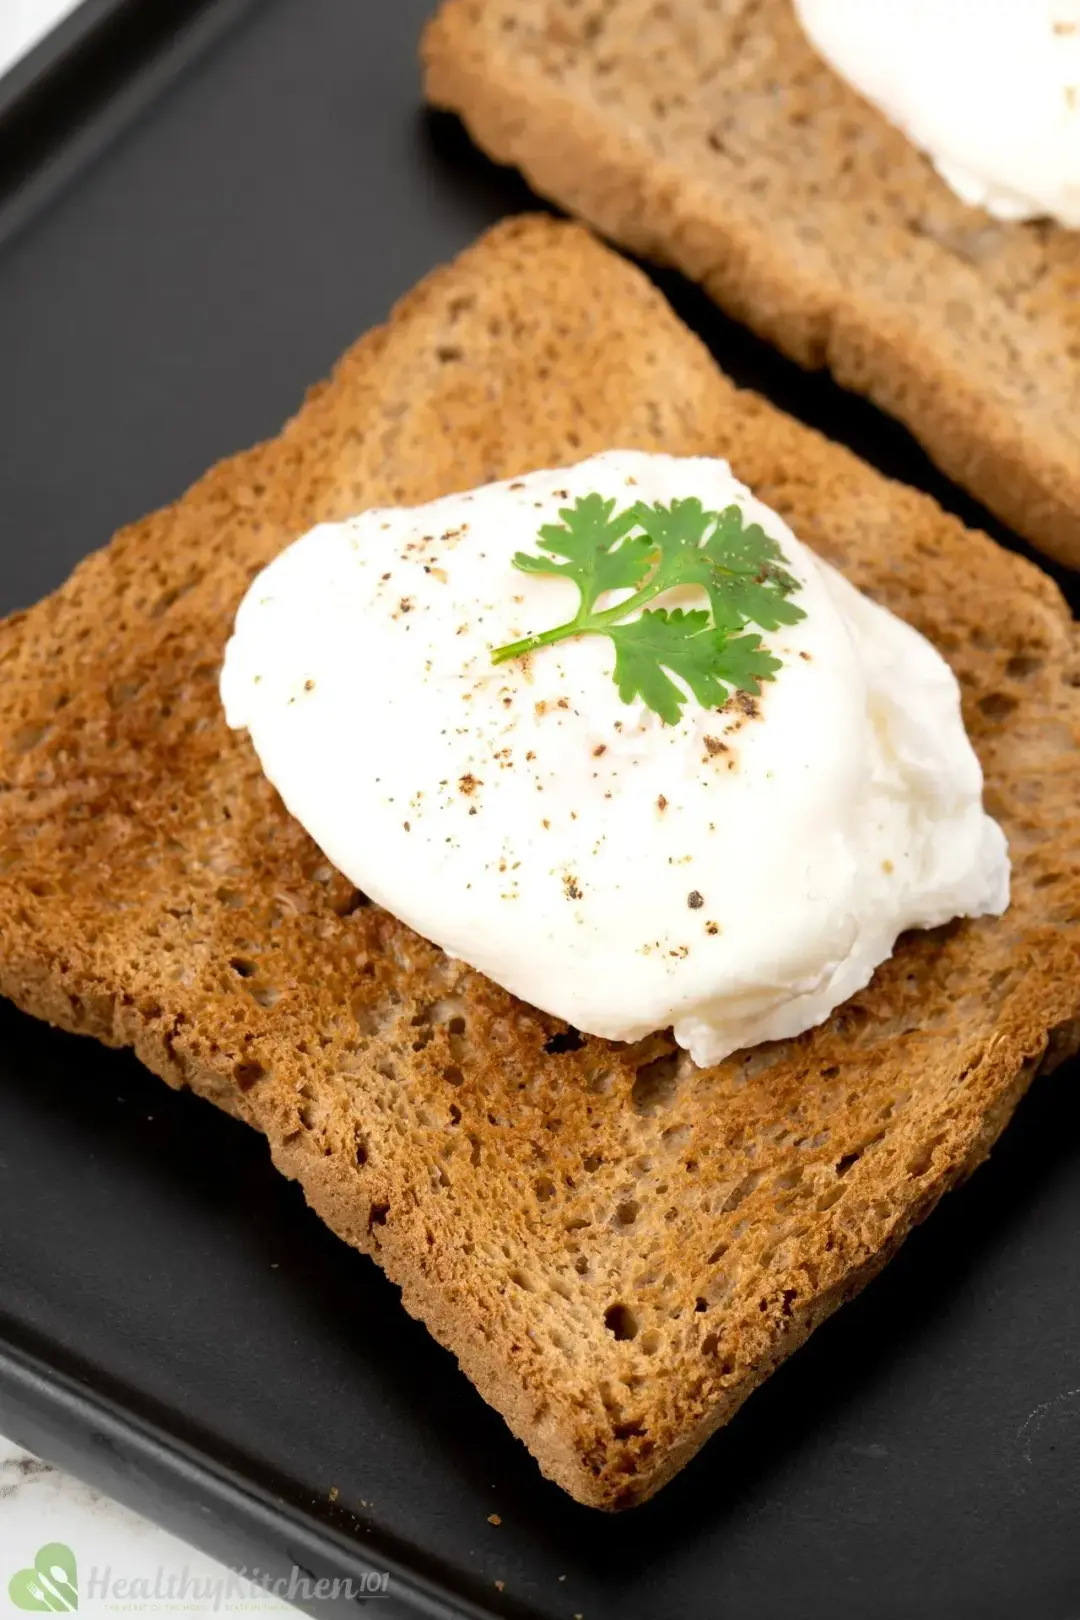 A slice of brown toast with a poached egg on top, topped with pepper and a cilantro sprig